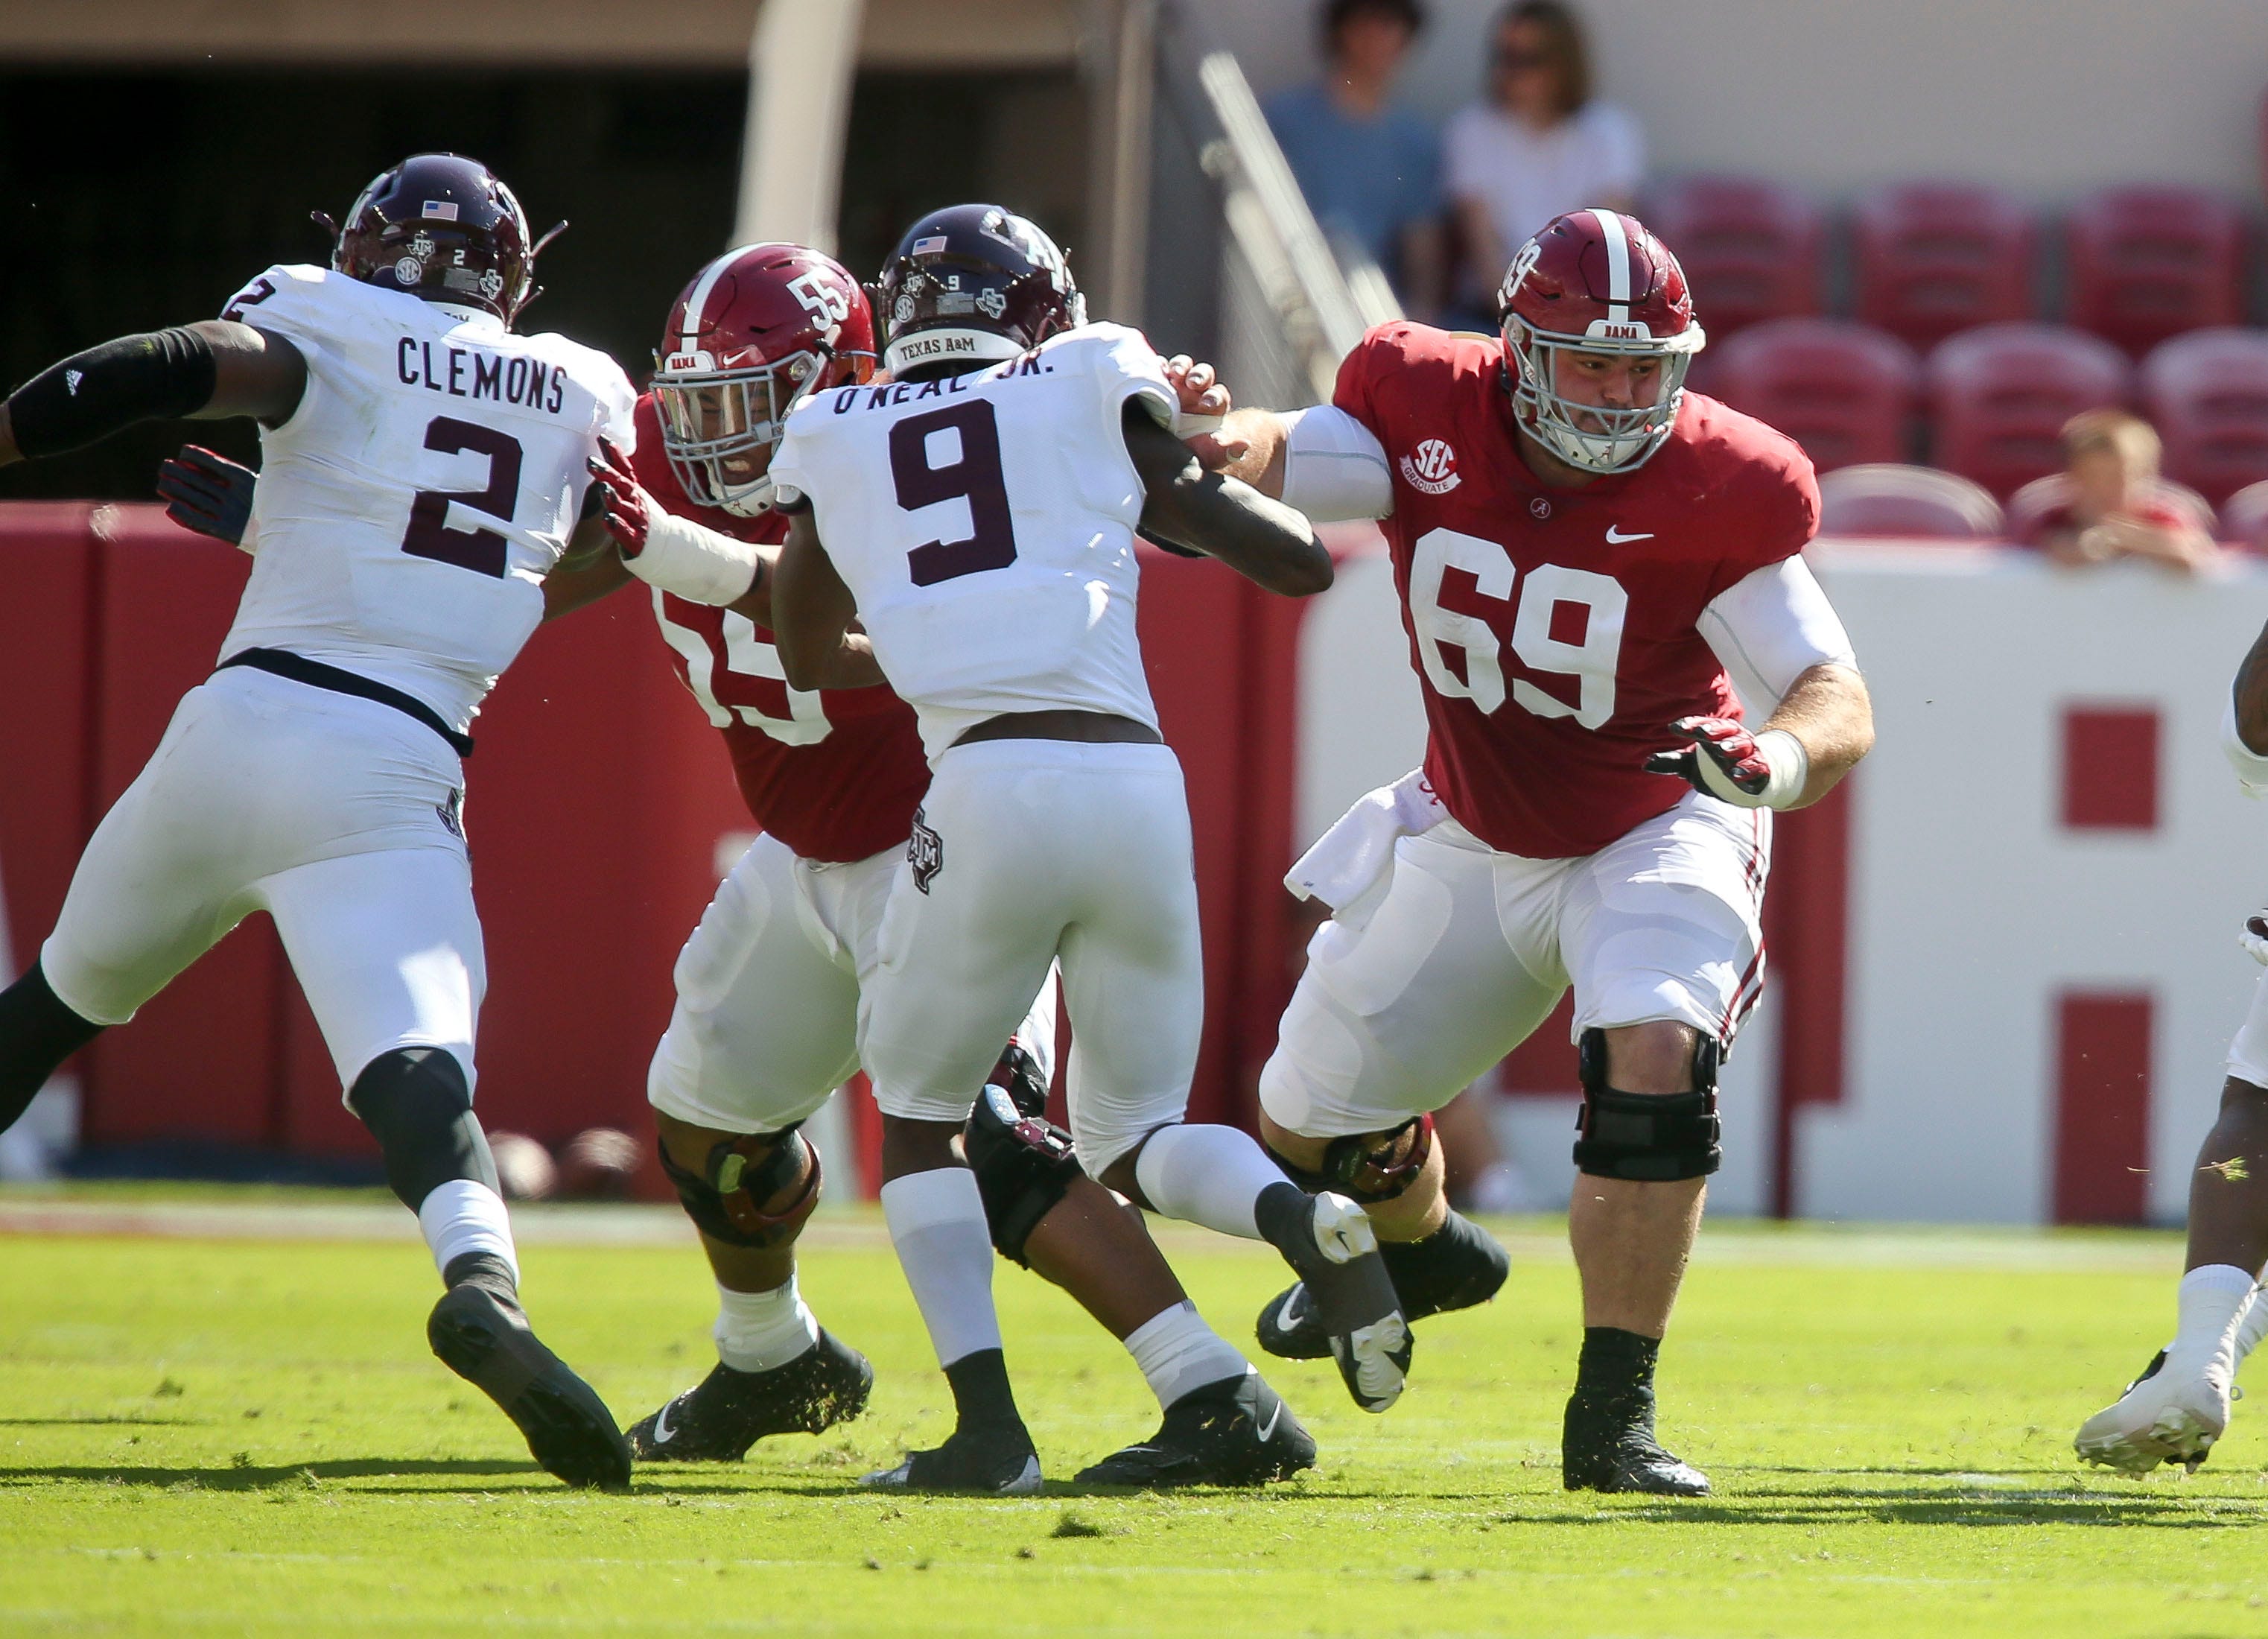 Alabama offensive lineman Landon Dickerson (69) and Alabama offensive lineman Emil Ekiyor Jr. (55) pass block during Alabama's game with Texas A&M Saturday, Oct. 3, 2020, in Bryant-Denny Stadium. [Staff Photo/Gary Cosby Jr.]